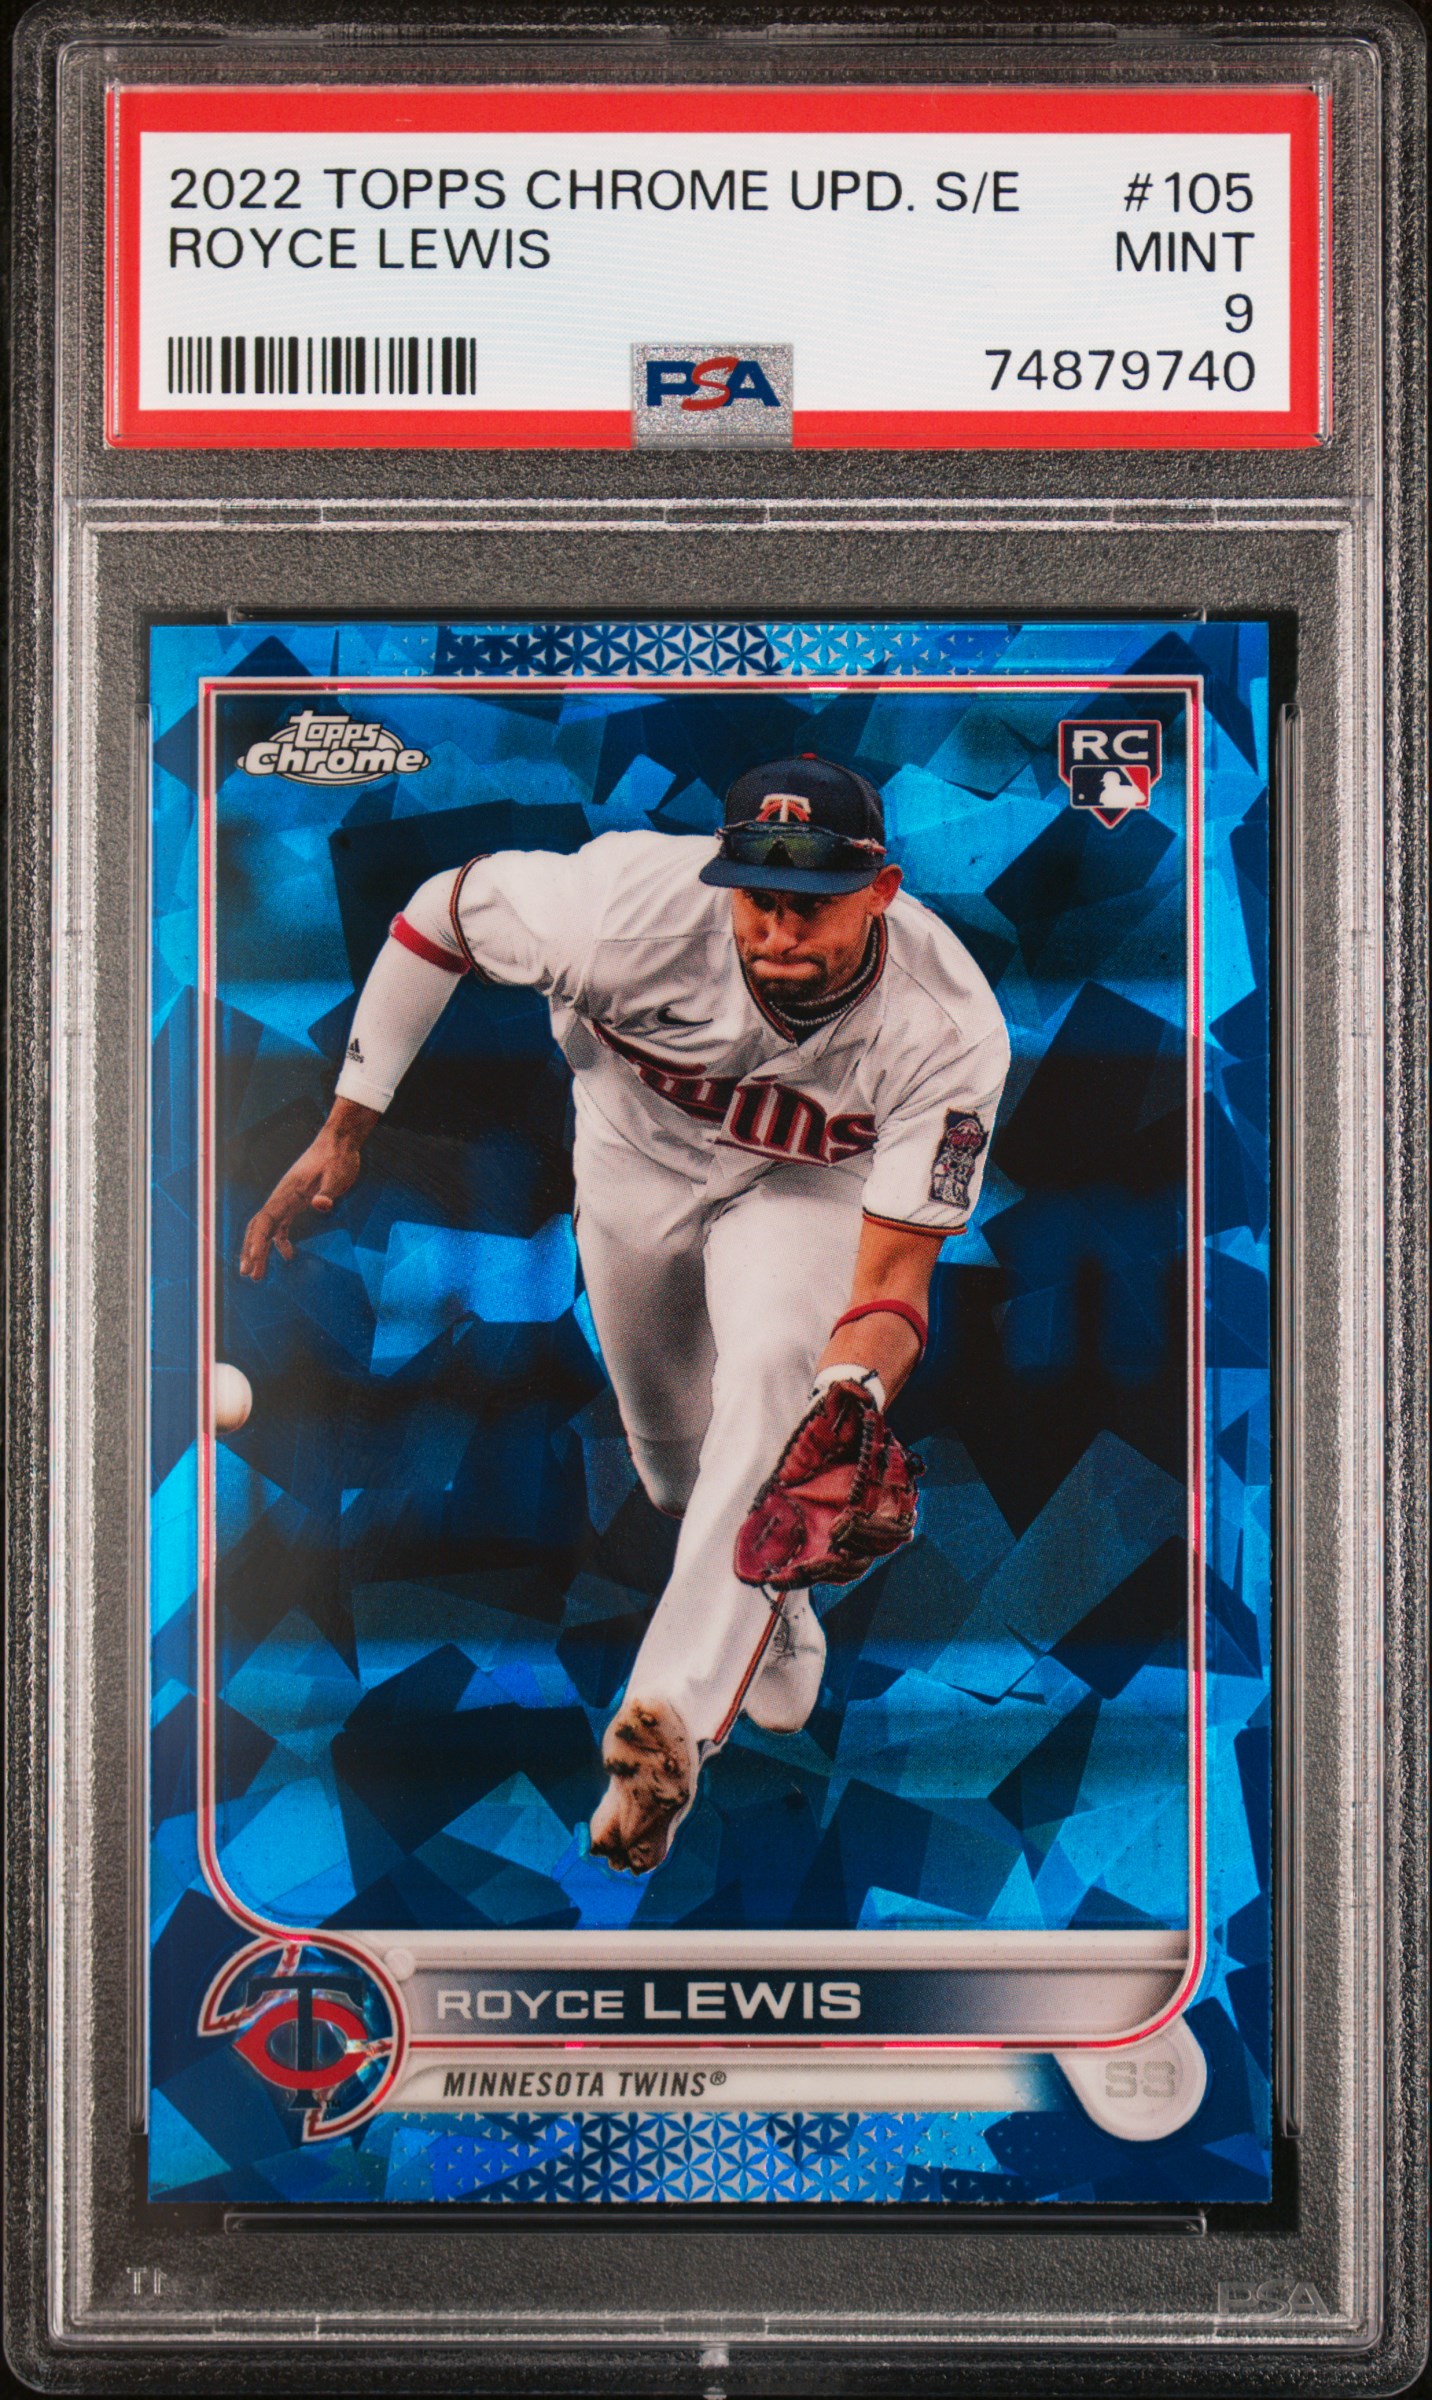 2022 Topps Chrome Update Sapphire Edition #105 Royce Lewis – PSA MINT 9